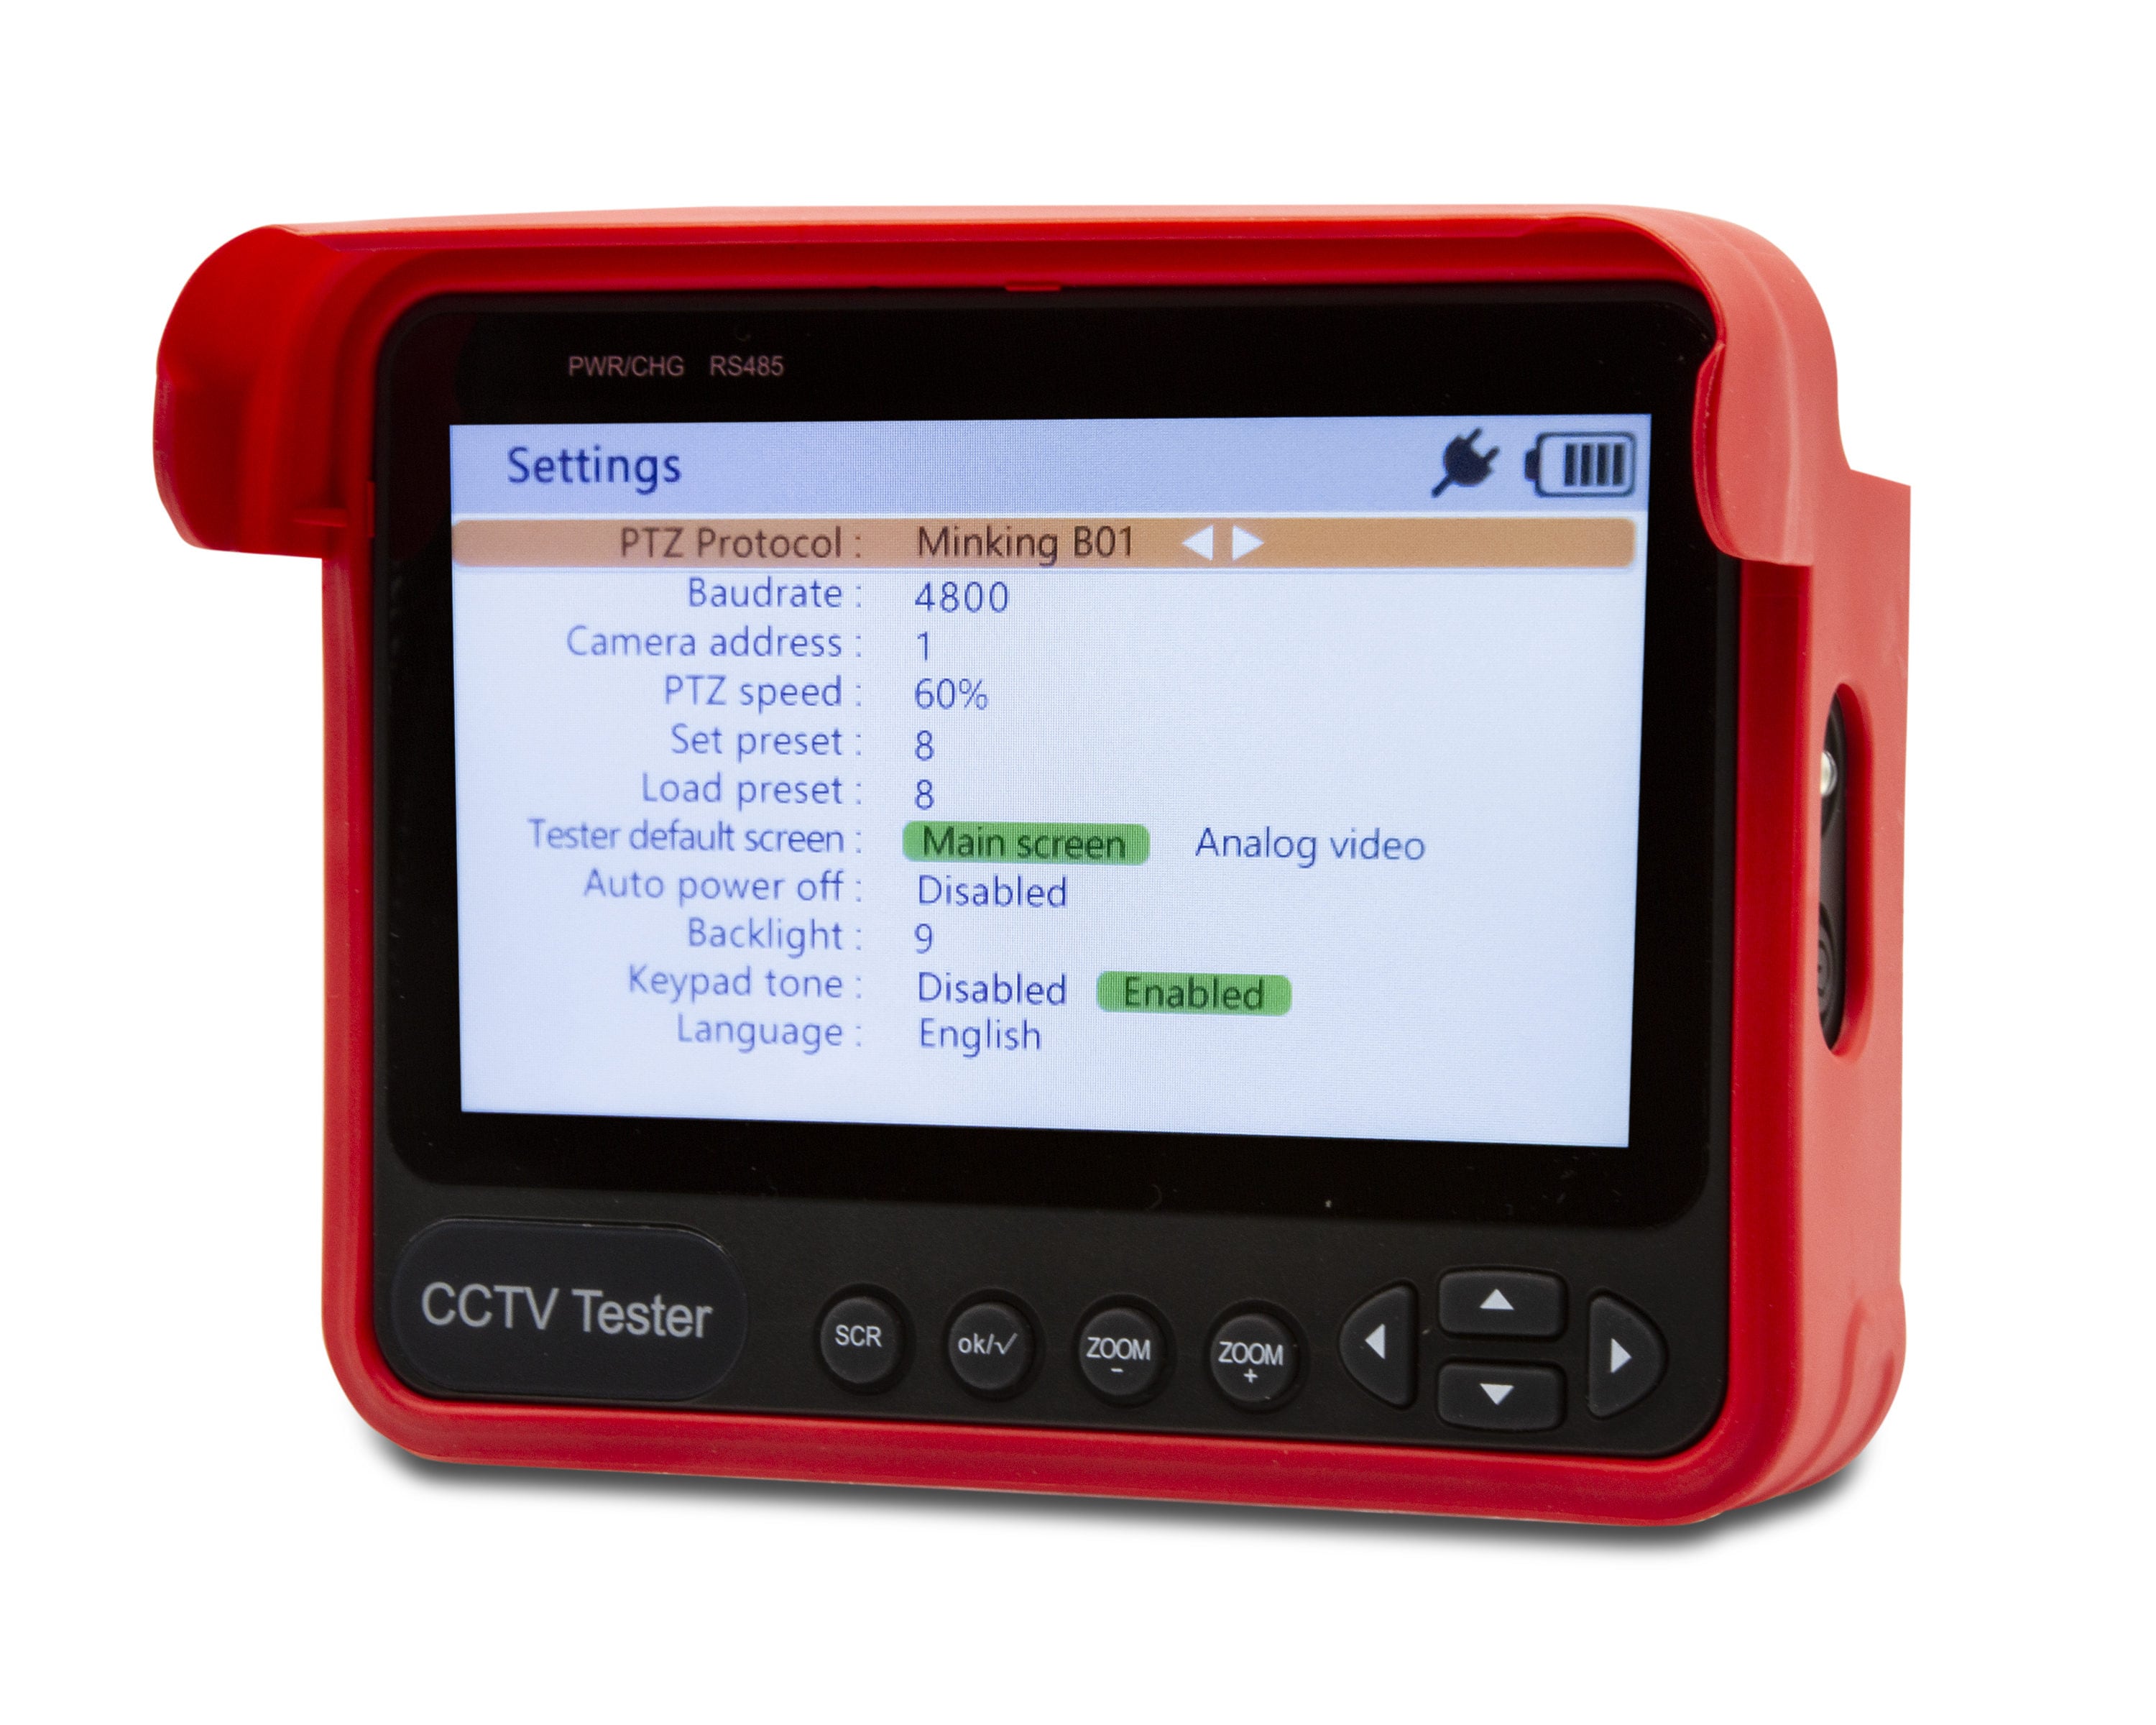 LCD Specialty Meter for Analog Testing of 8MP Cameras (Red) - Supports Multiple Encoding Types | - TRIPLETT 8064